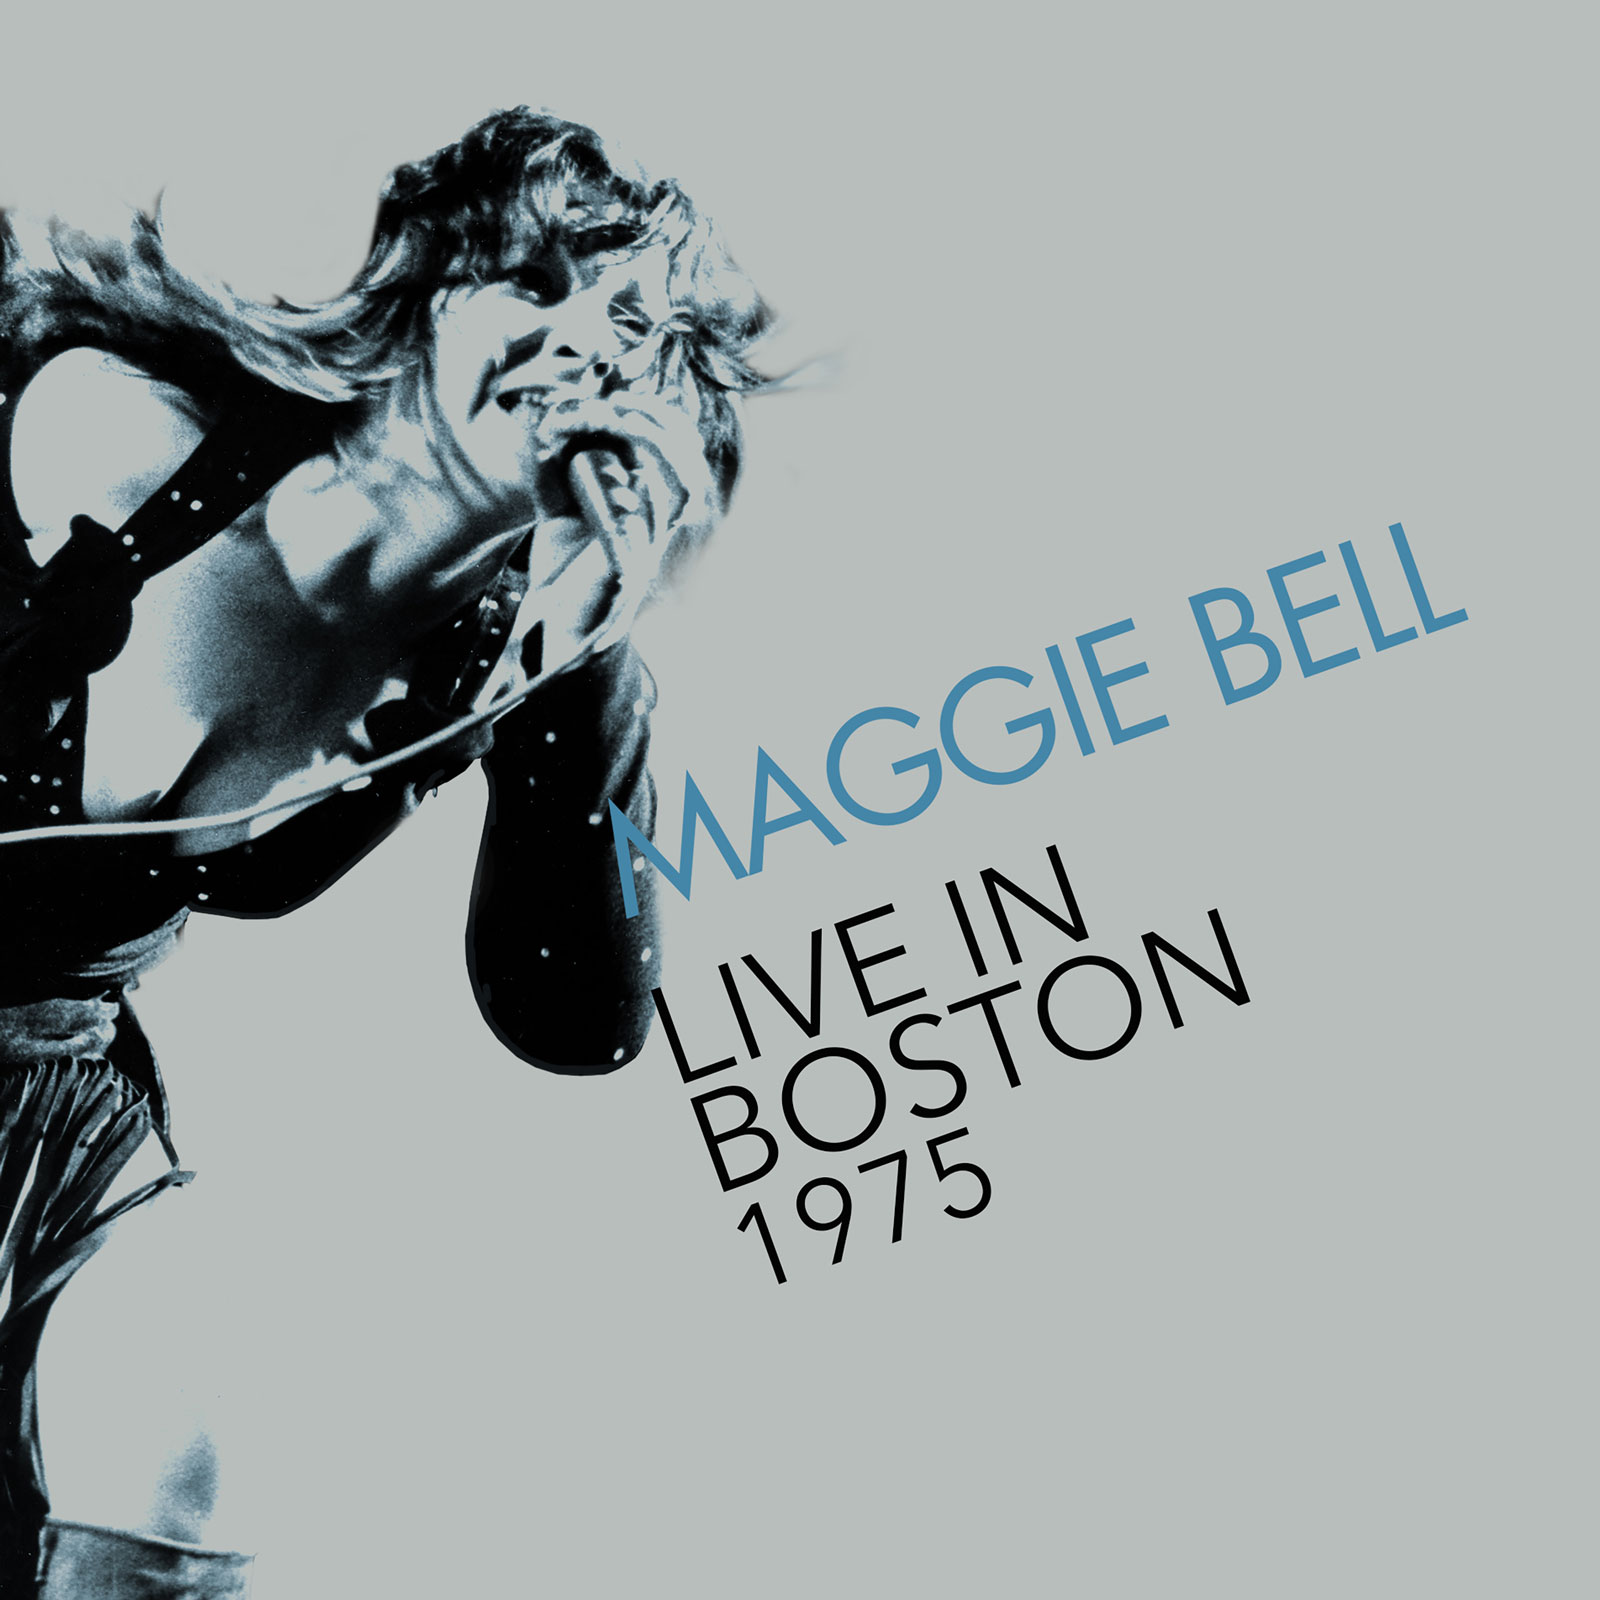 Maggie Bell – Live In Boston 1975